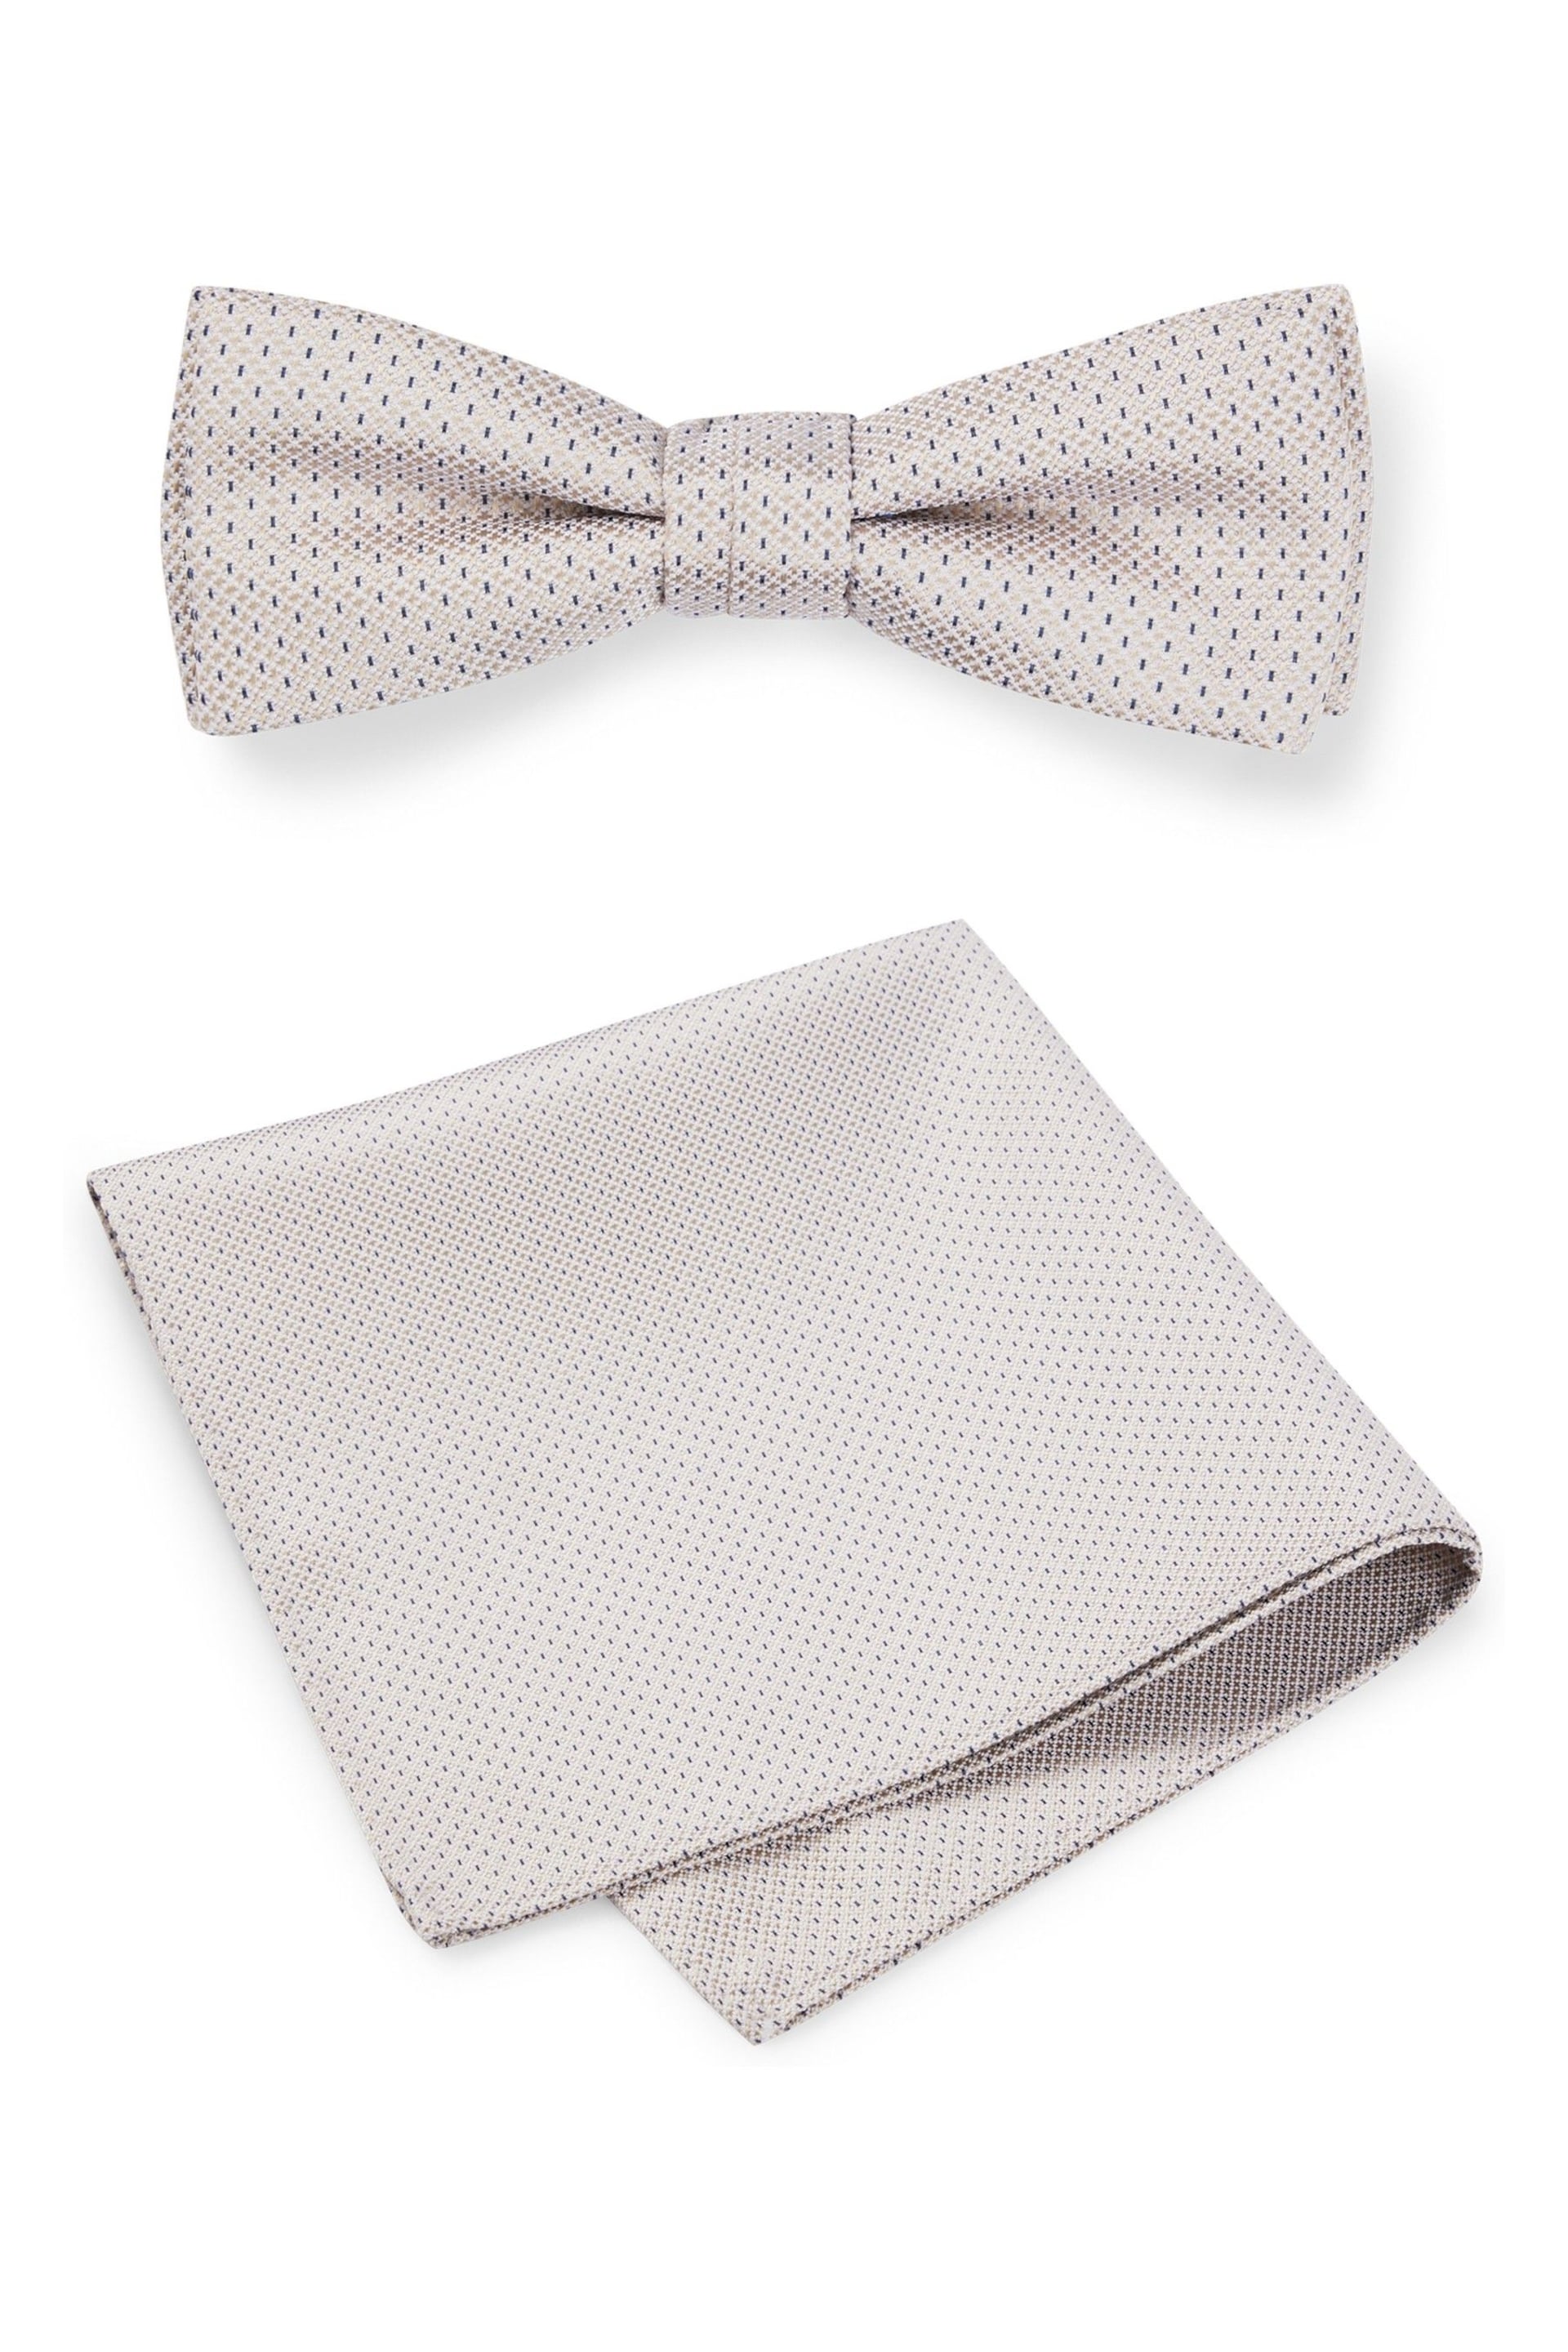 BOSS White Bow Tie and Pocket Square in Silk-Blend Jacquard - Image 1 of 4